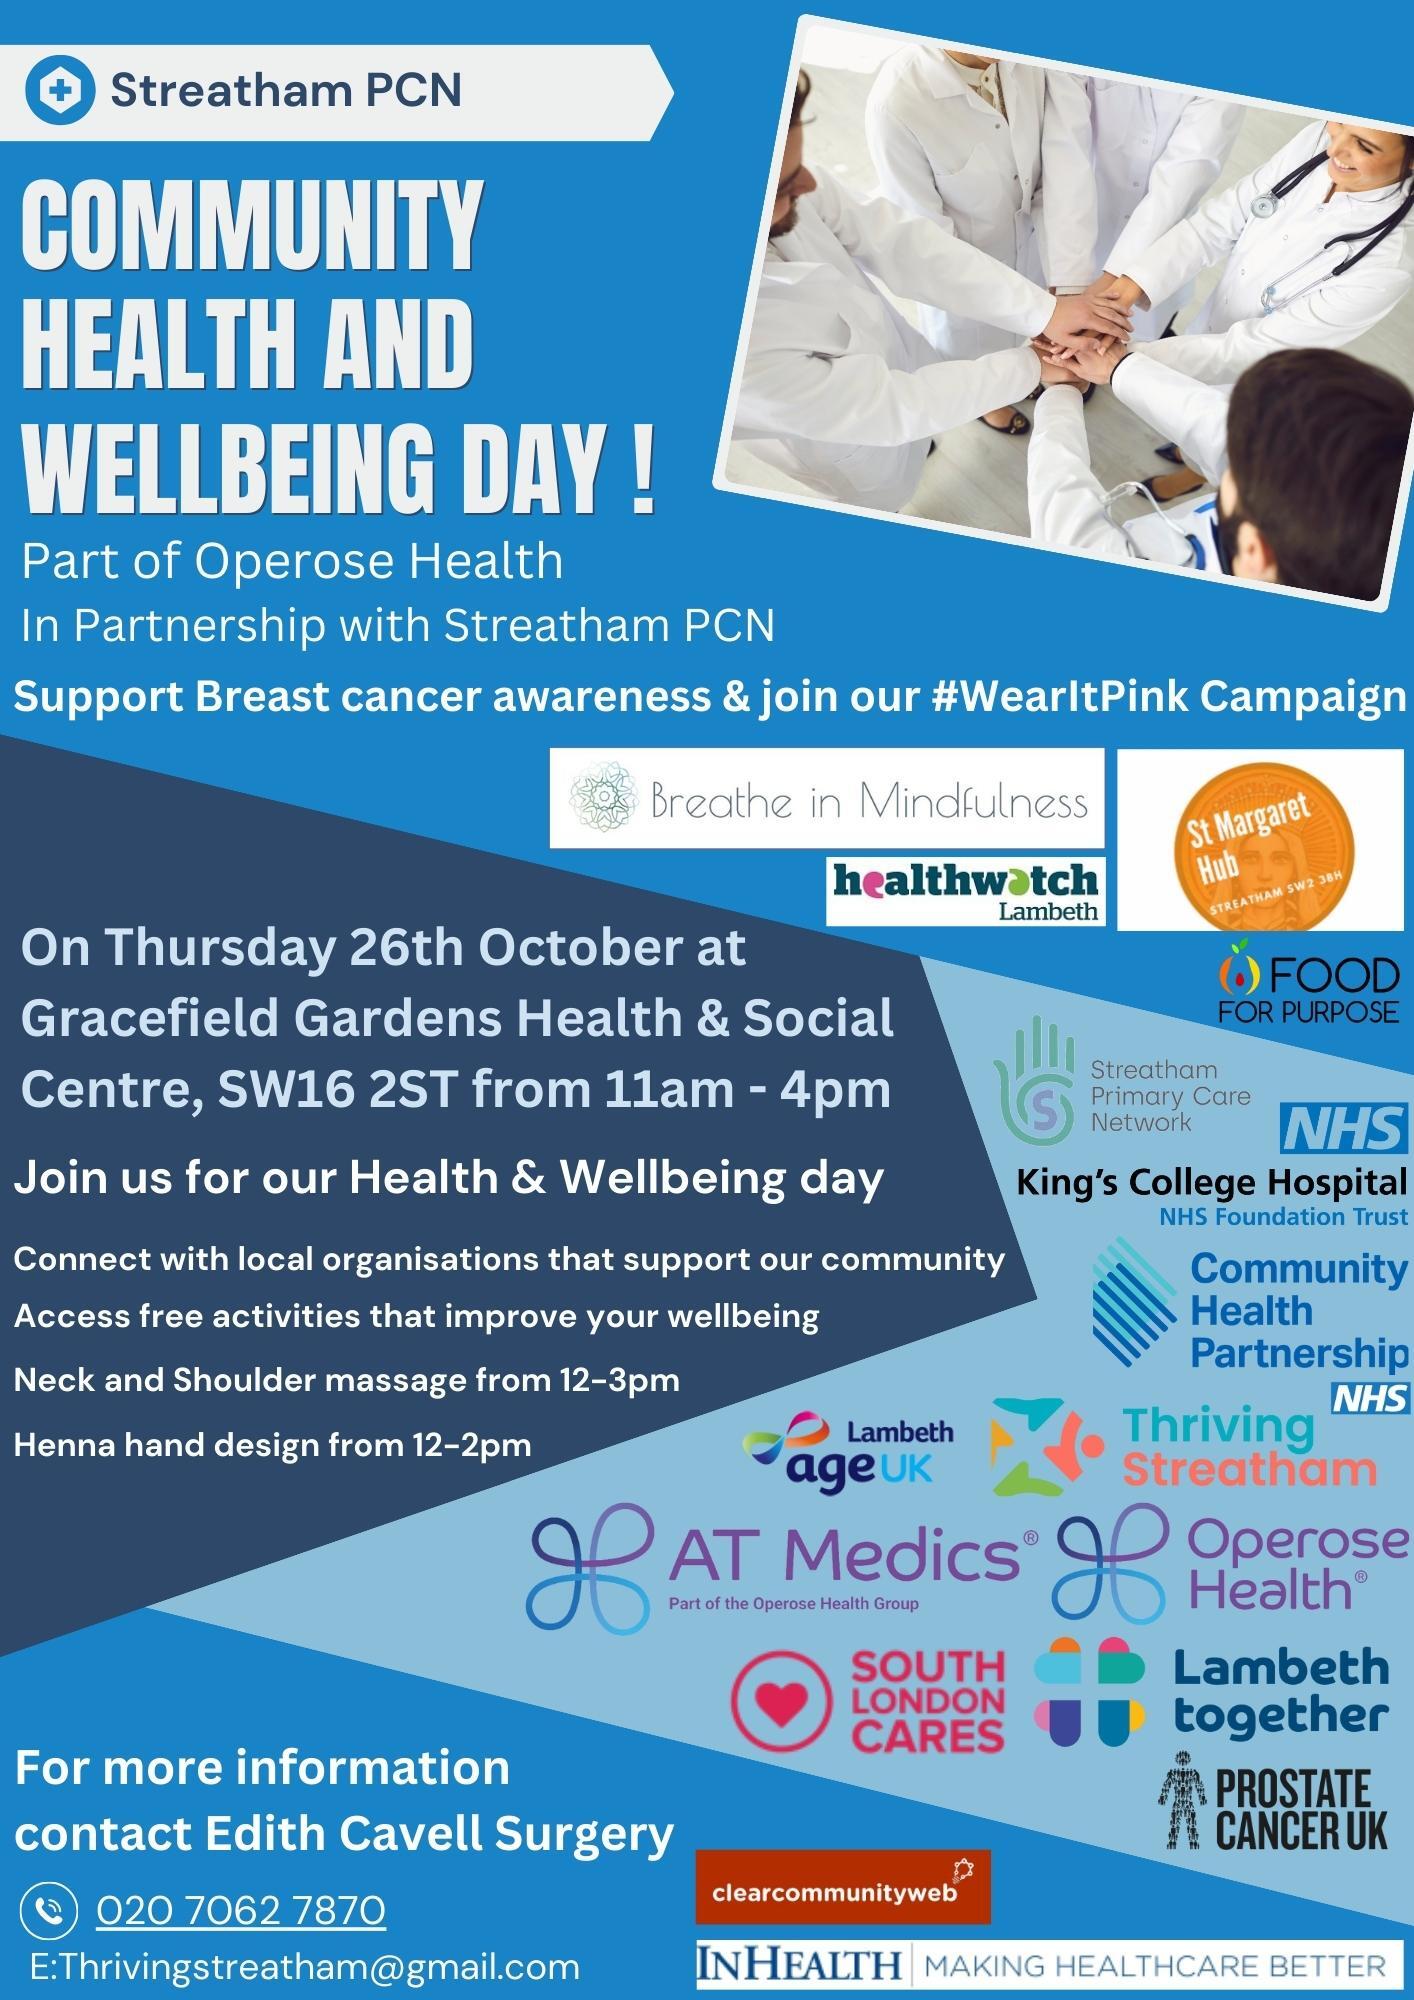 Community Health and Well Being Day